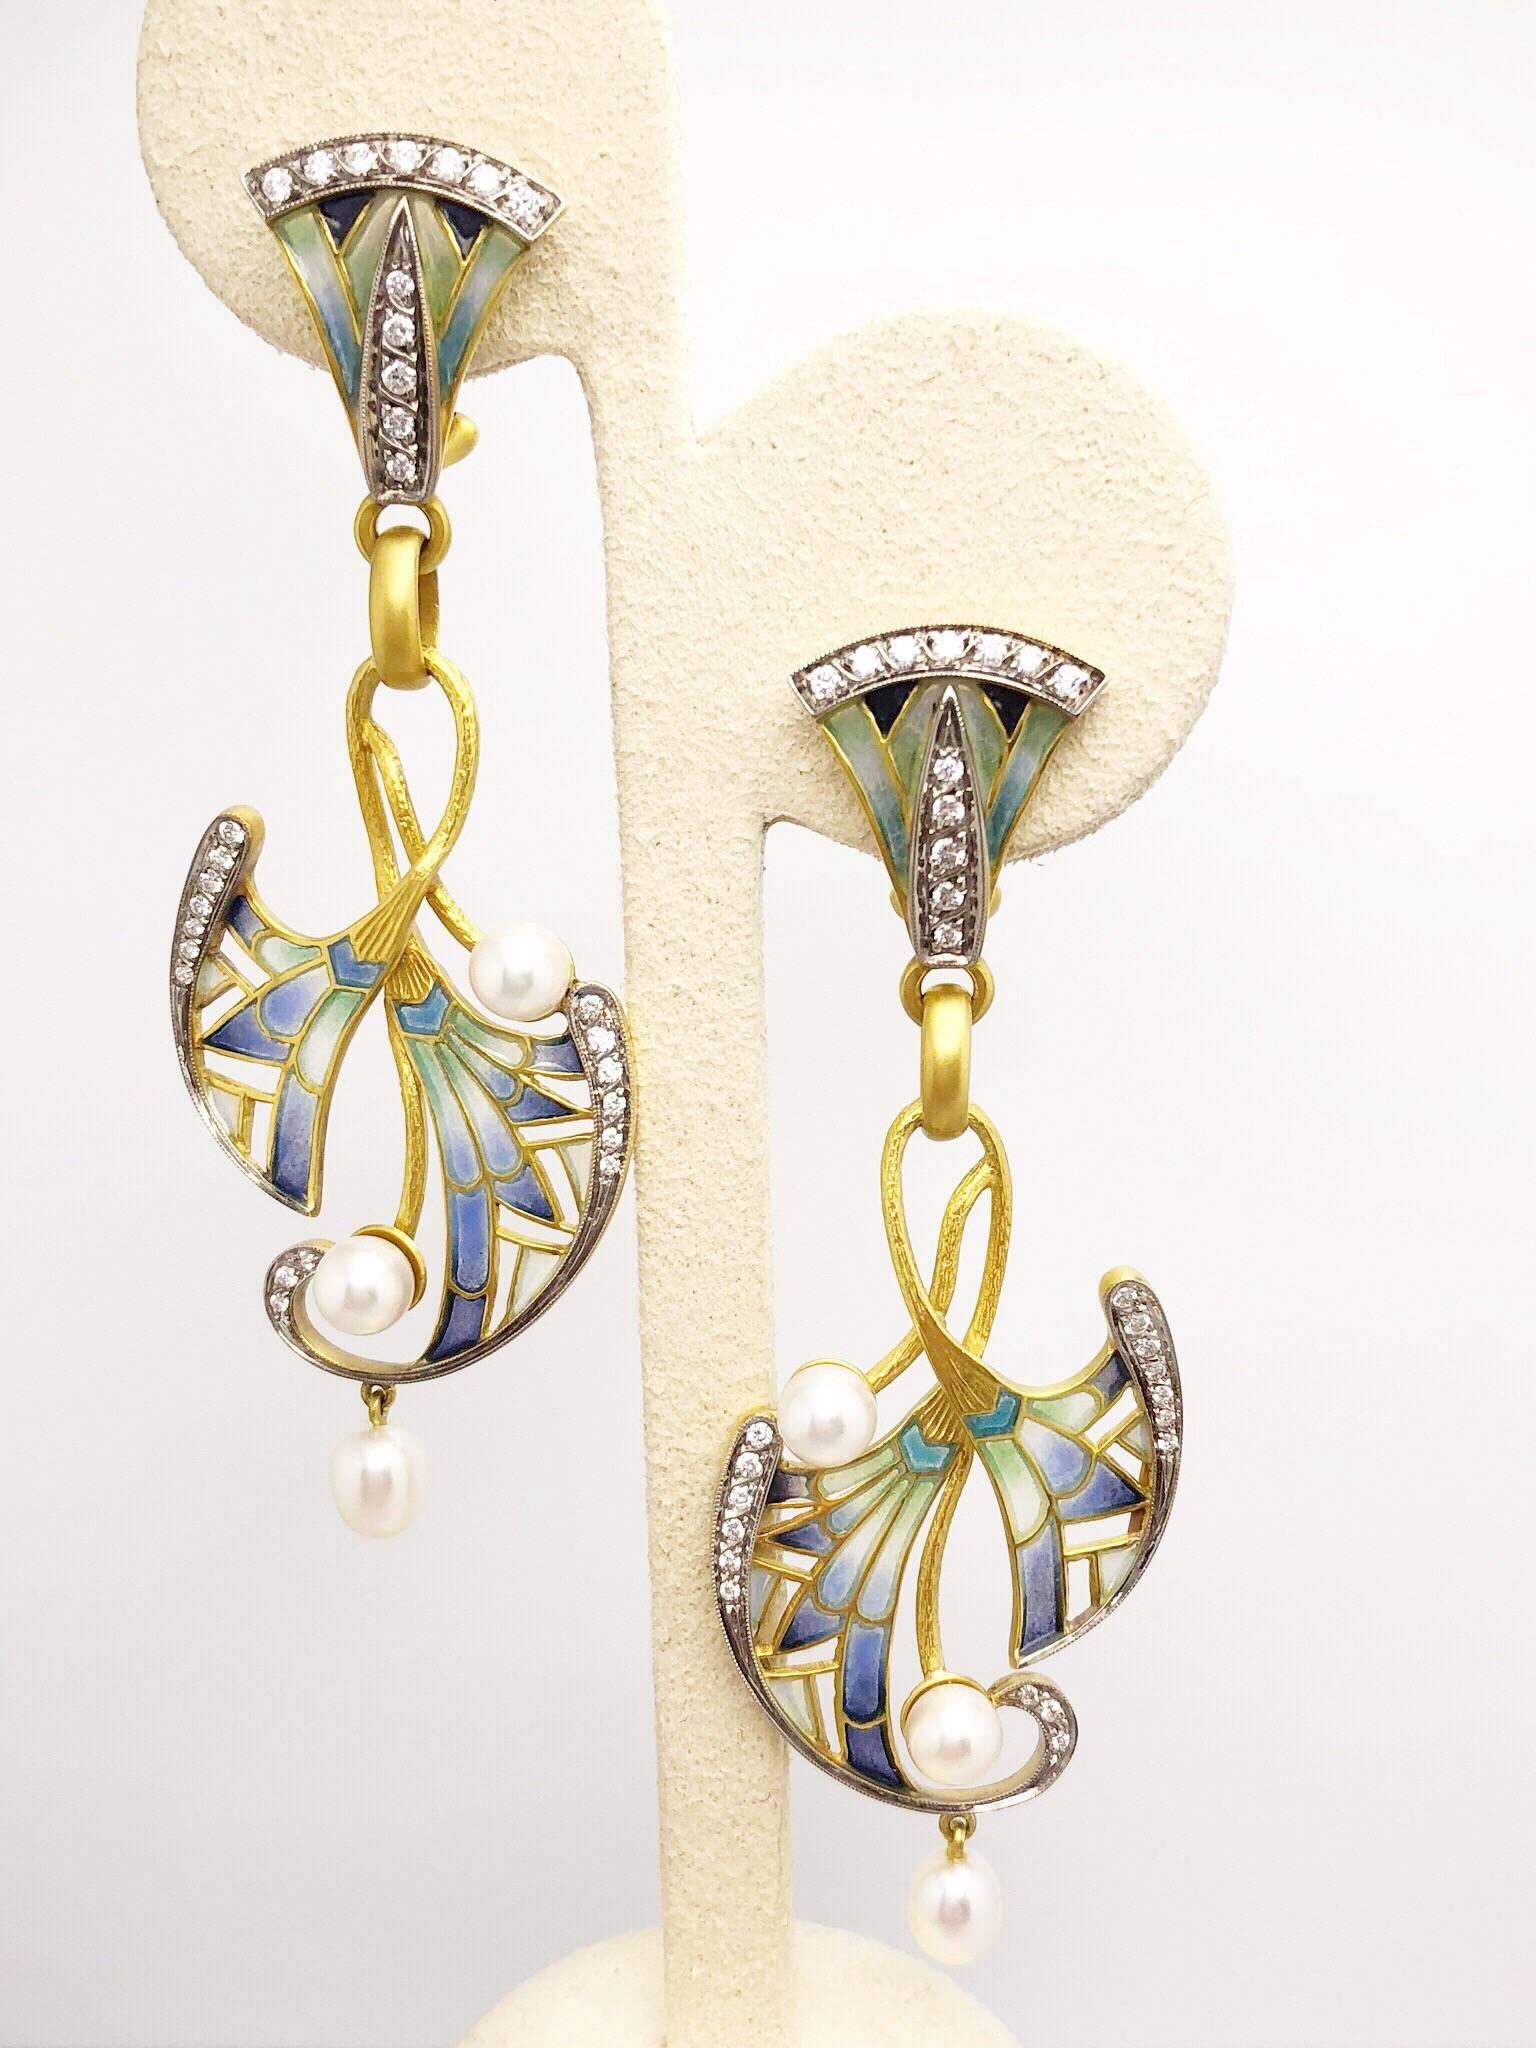 From the house of the prolific Art Nouveau designer, Luis Masriera comes a long tradition of prestige, creativity and unparalleled craftsmanship. These stylistically distinctive works of art, have been crafted by Masriera since 1839 and continue to